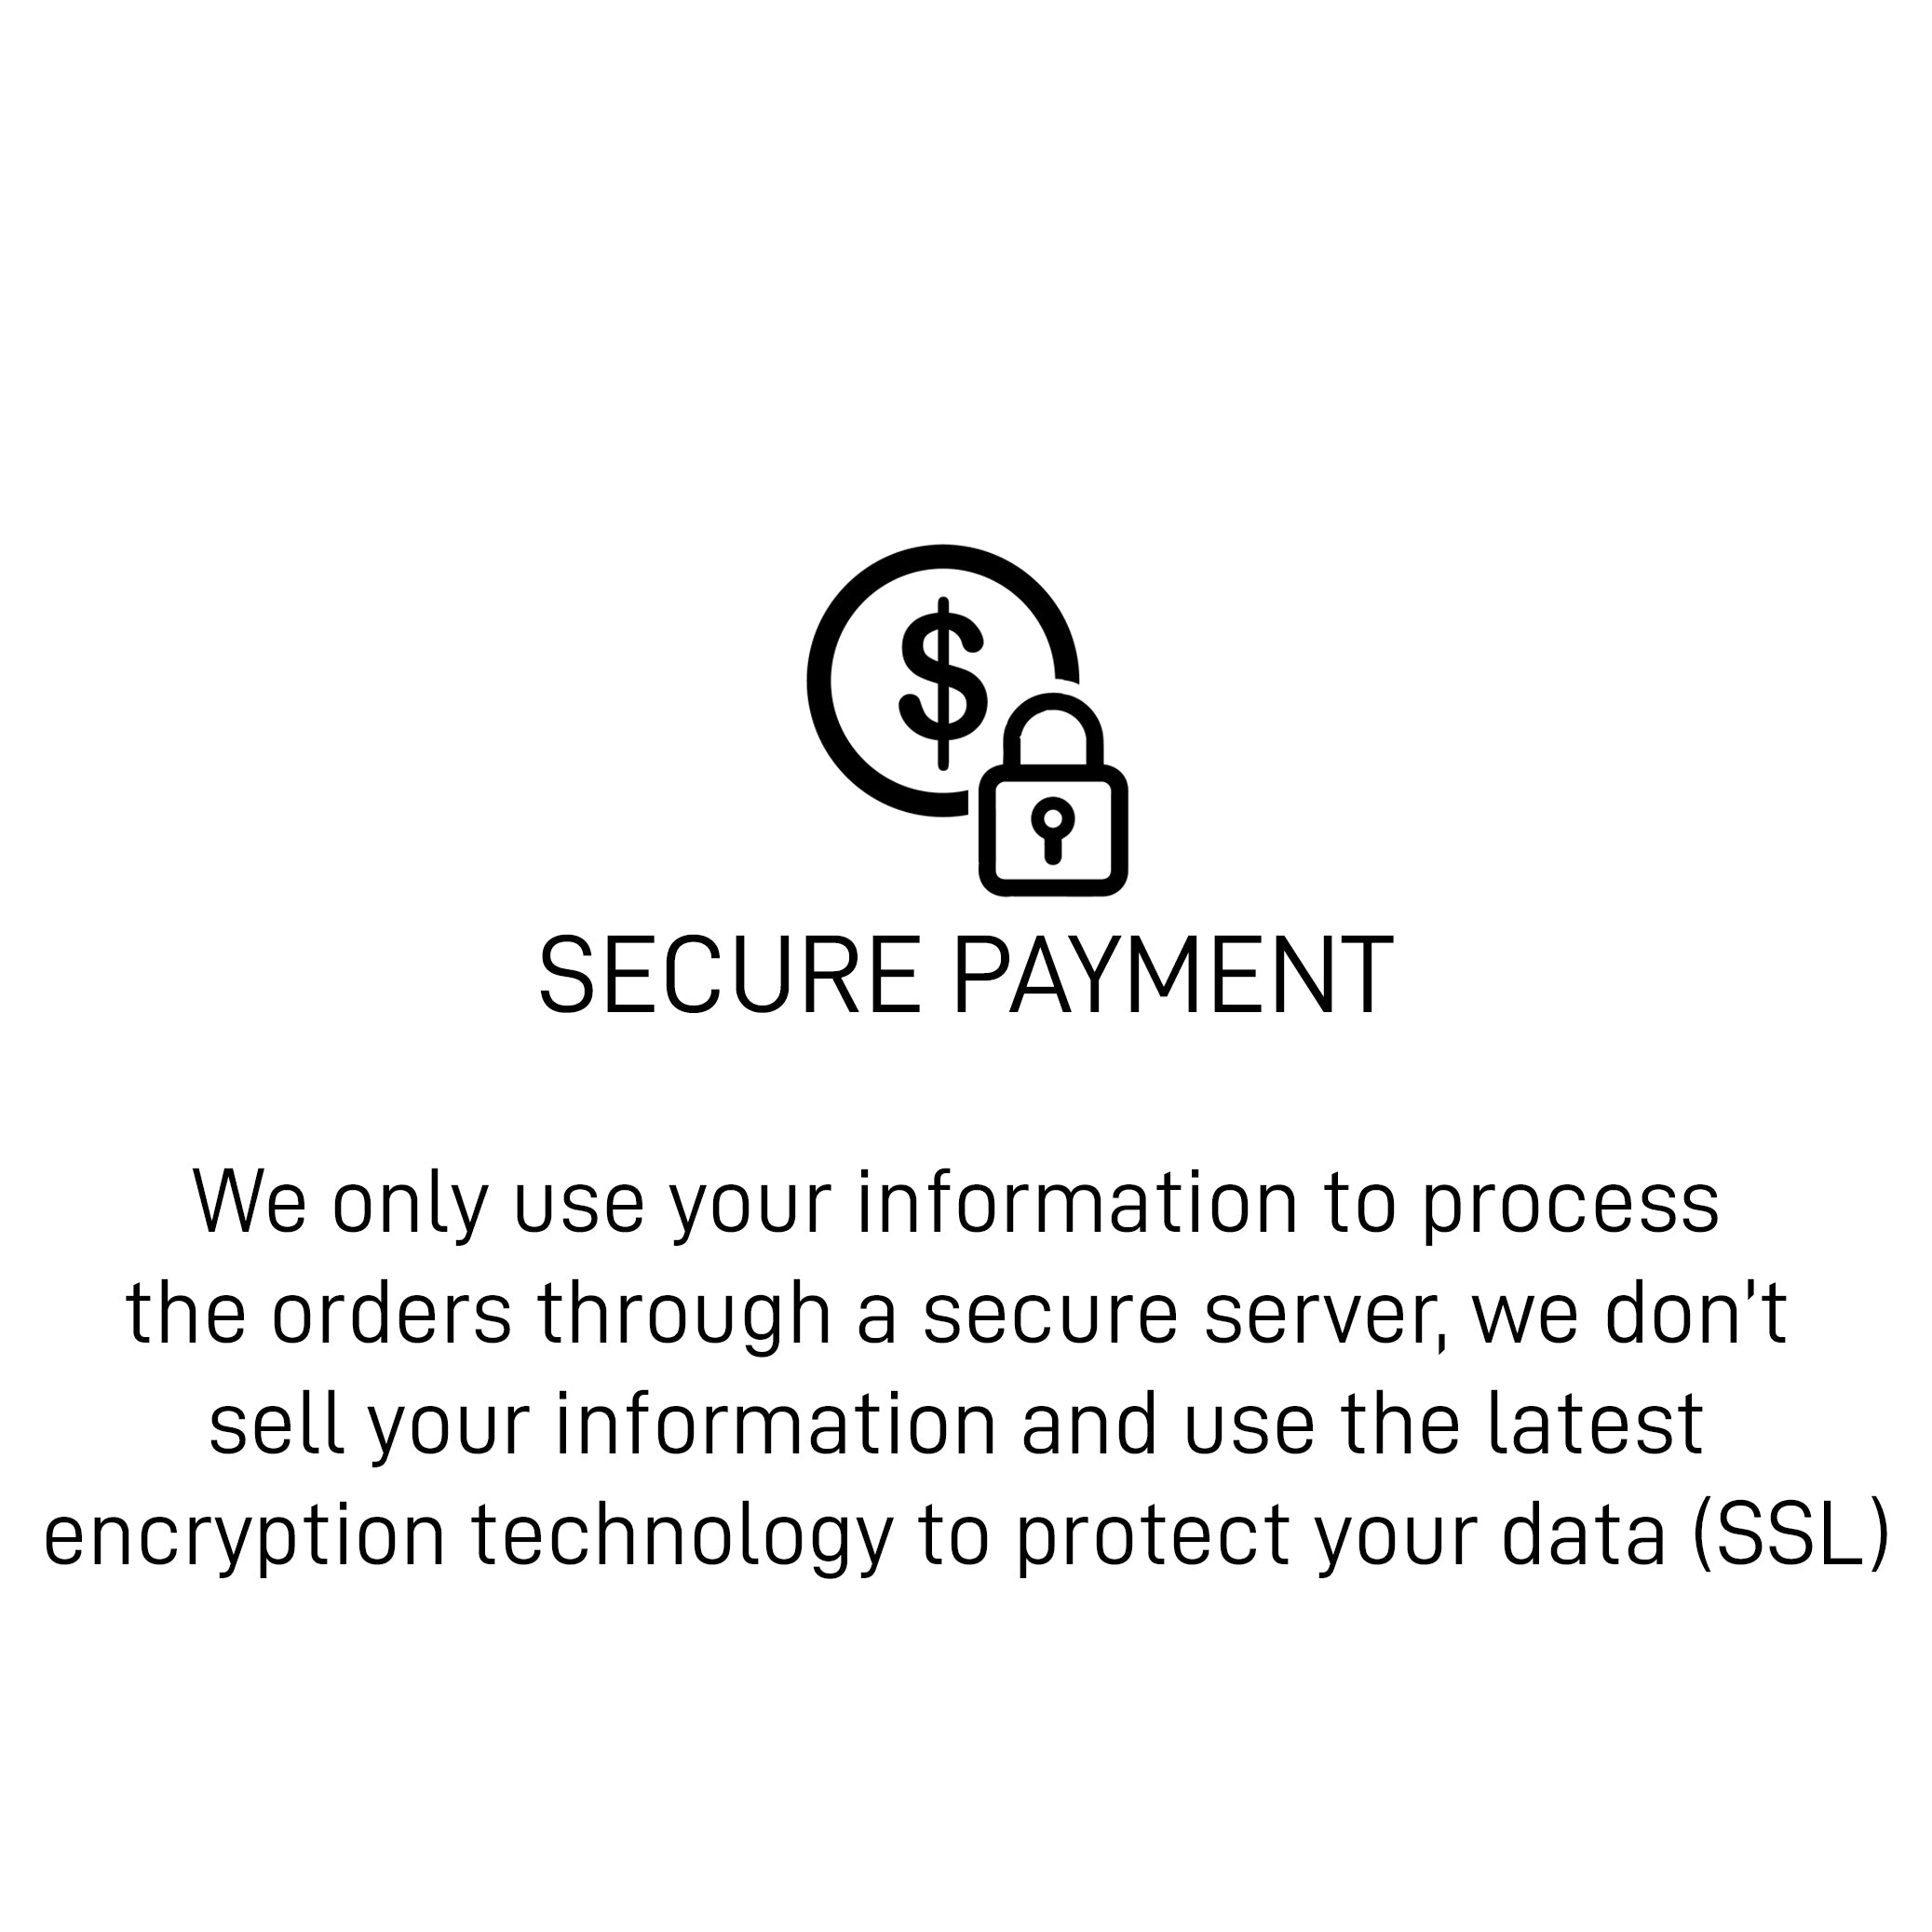 icon showing that your payment is received via a secure payment process